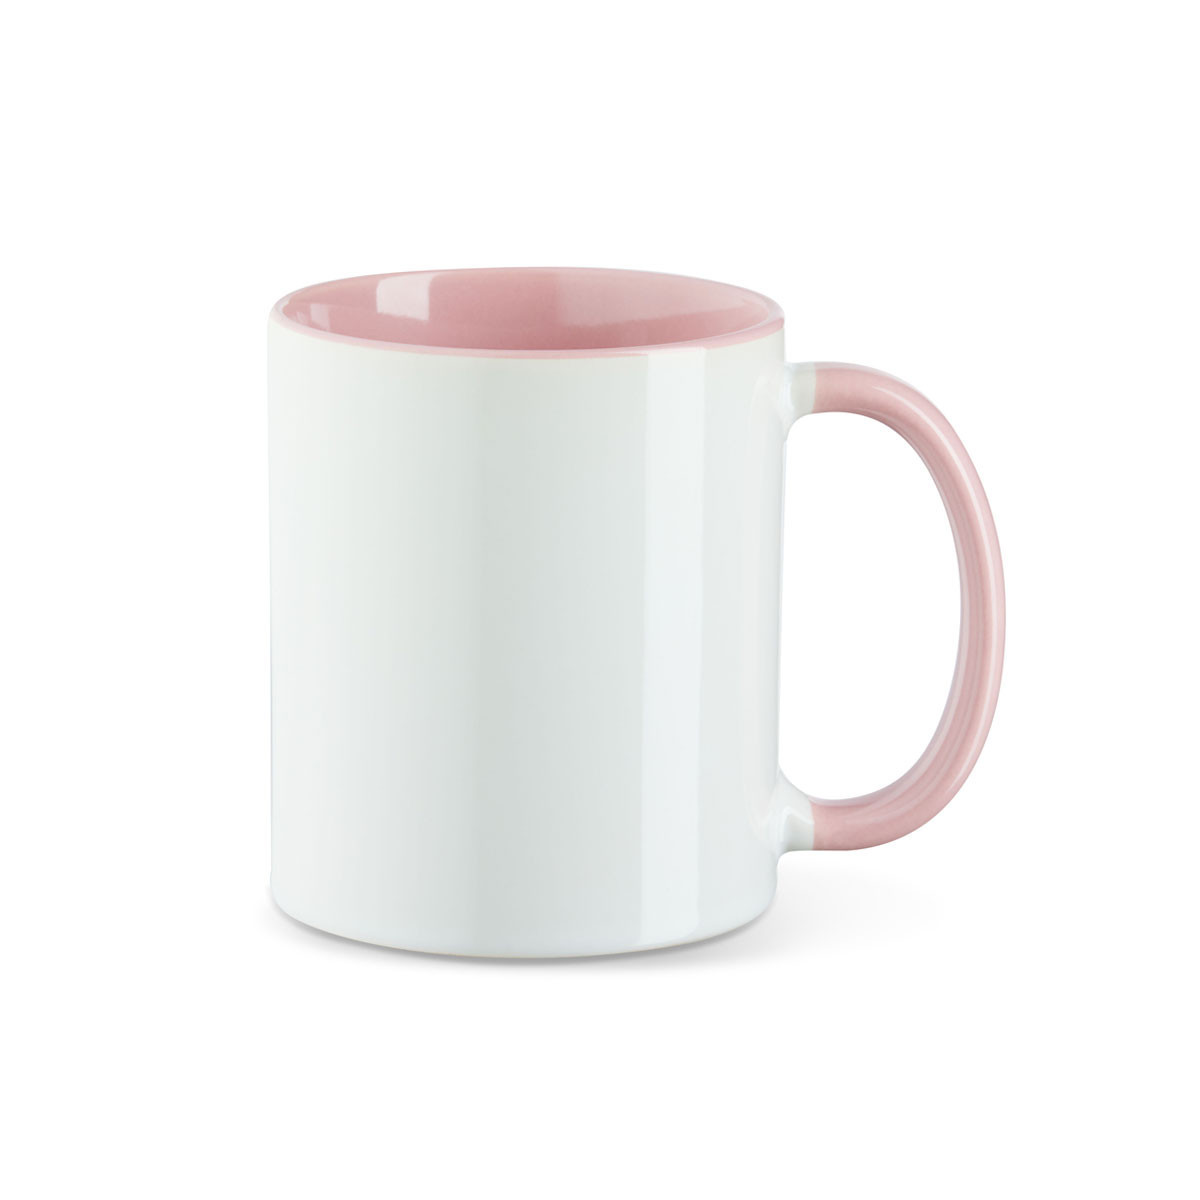  Sublitasse Intone pink, 11 oz in Farbe wei?/pink